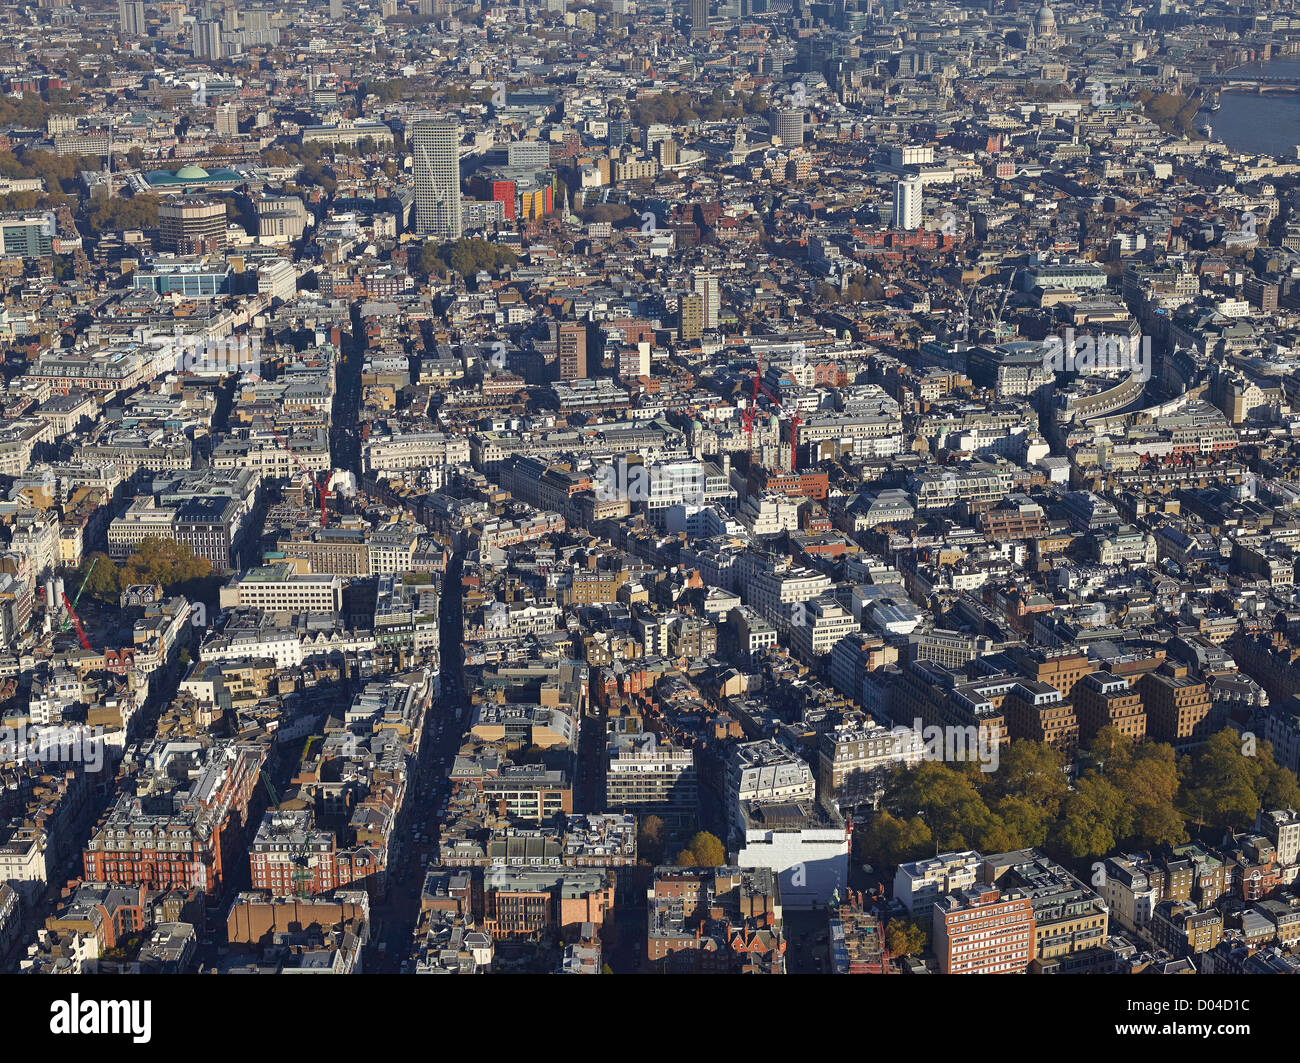 London Mayfair area from the air, England UK, looking West to East Stock Photo